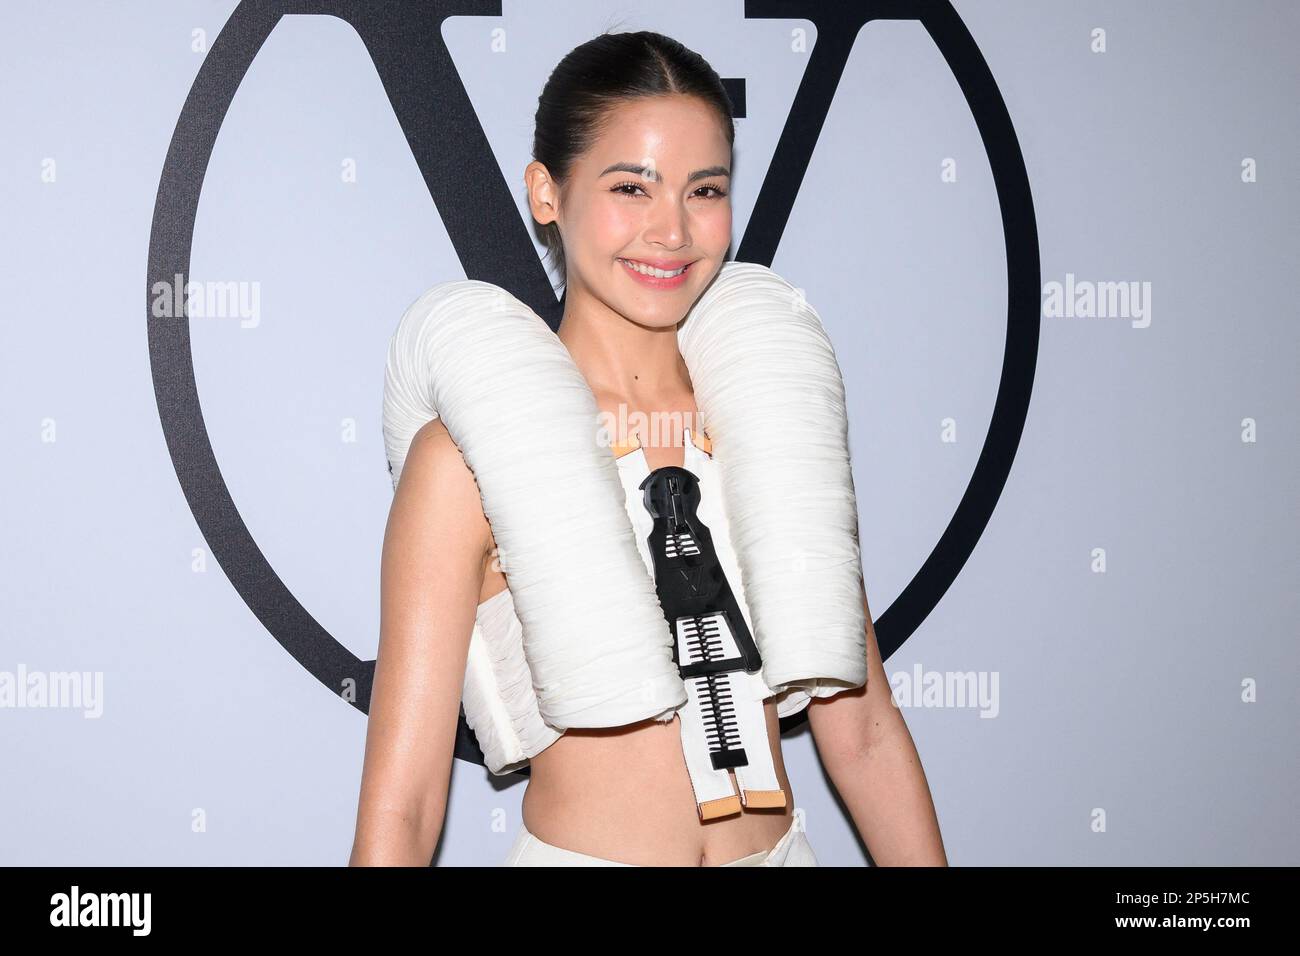 Urassaya to attend Louis Vuitton event as Friend of the House in